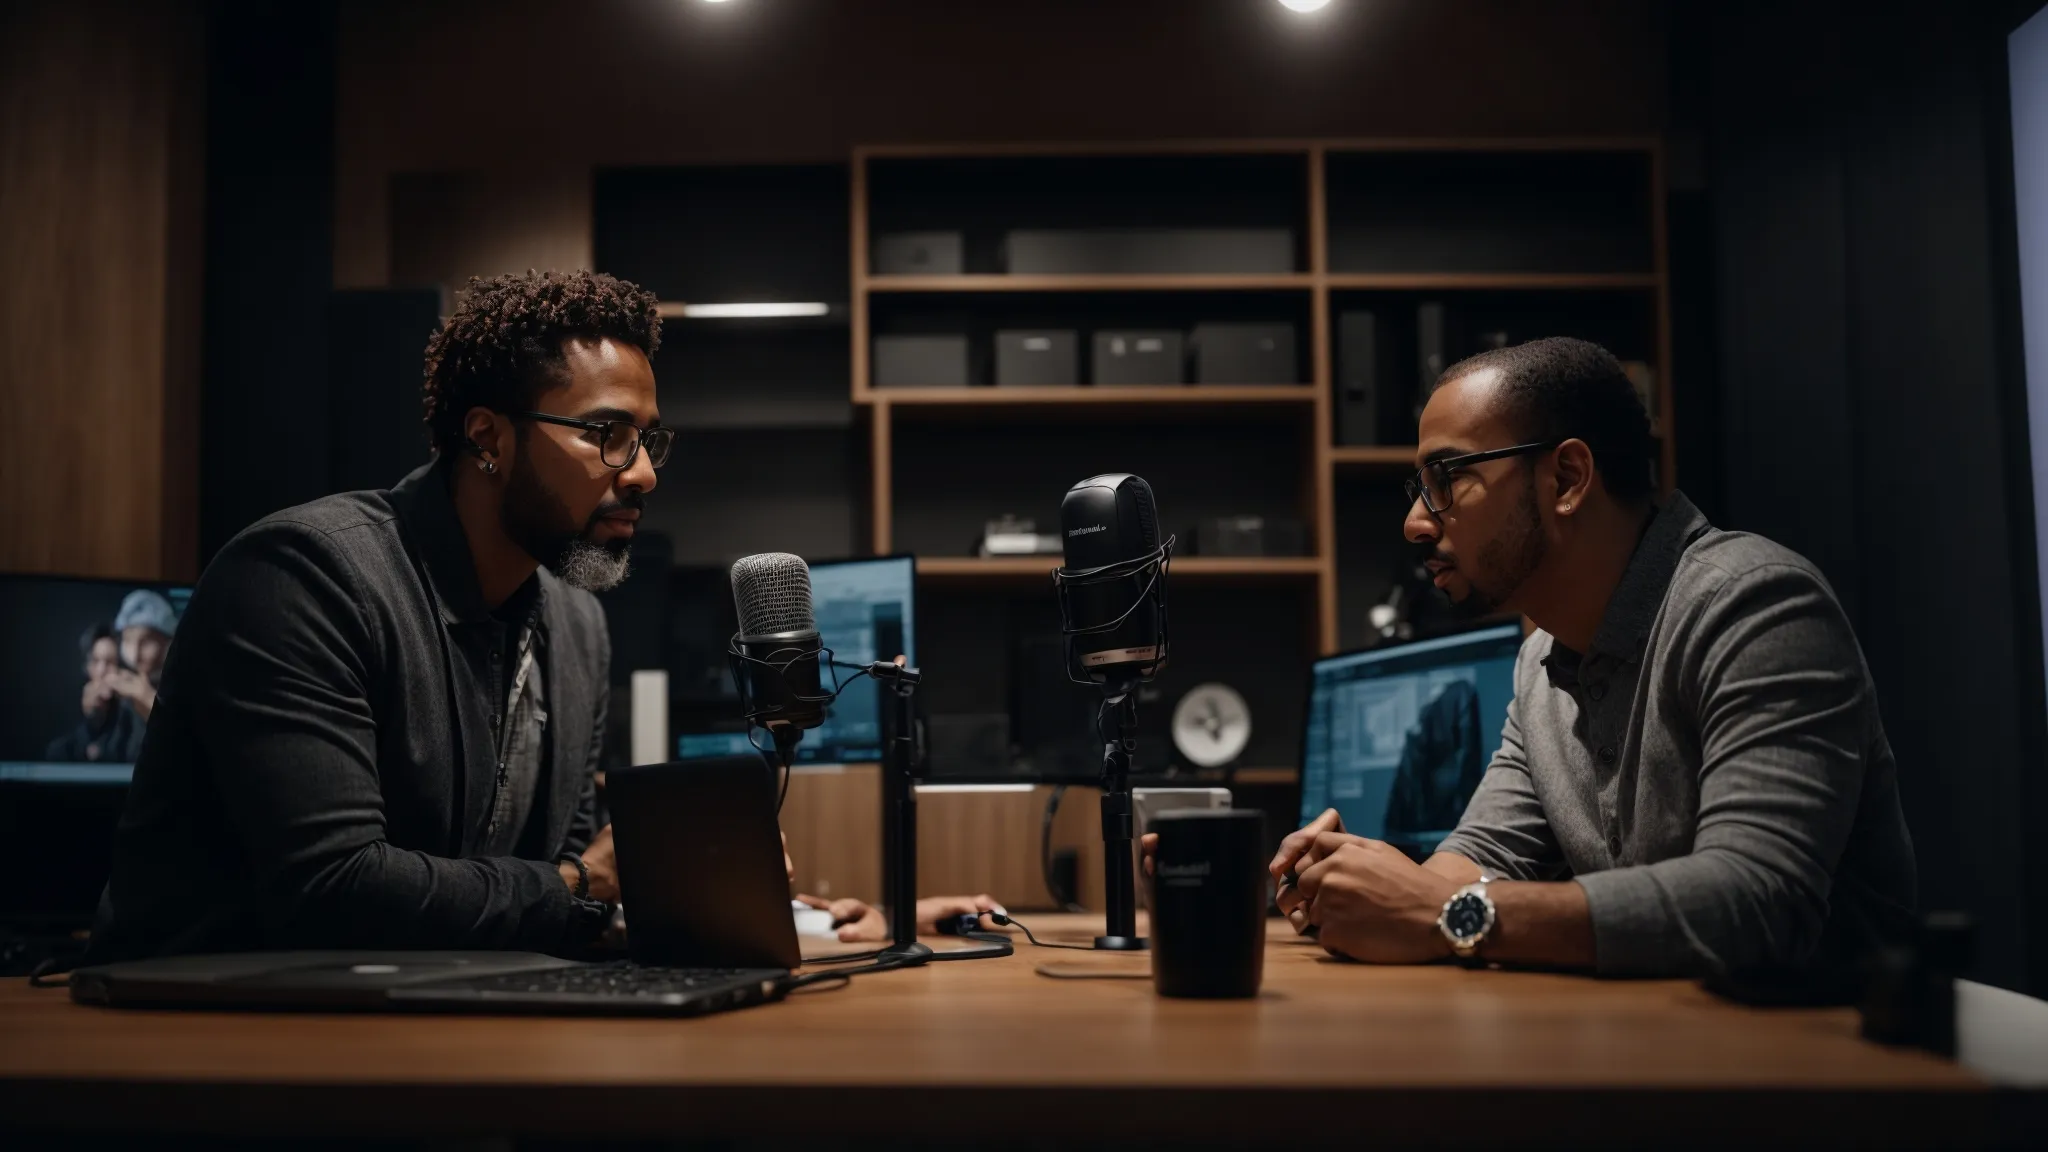 two professionals are engaging in a discussion in a podcast studio setup, with microphones and laptops in front of them, focused on digital marketing strategies.